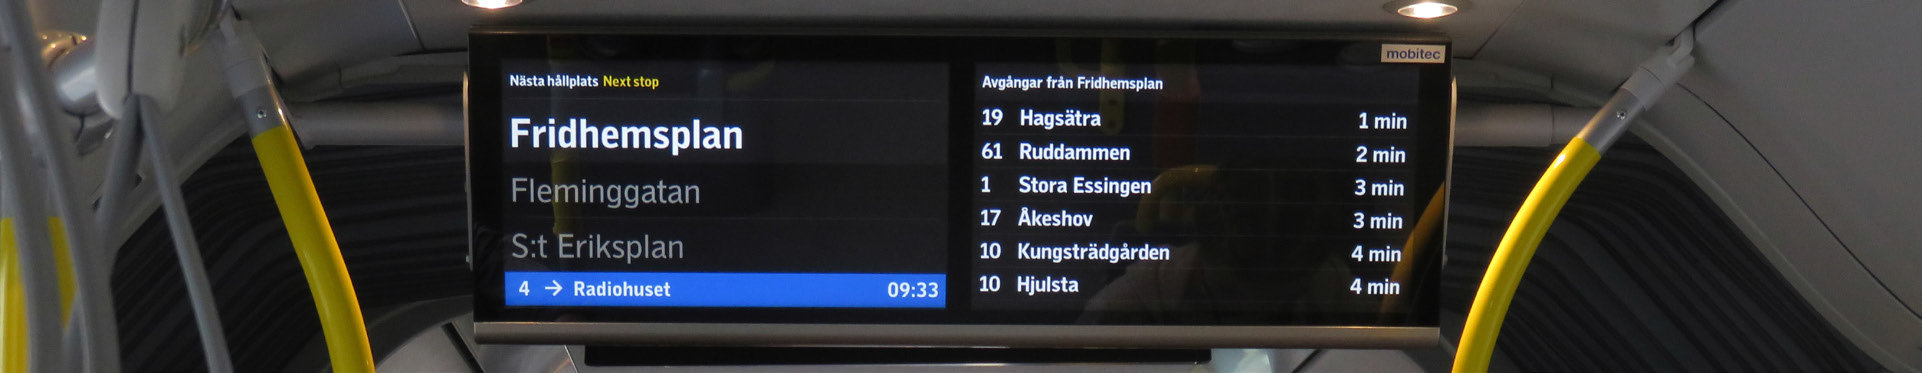 Figure : On-Board Digital Signage showing arrival times.